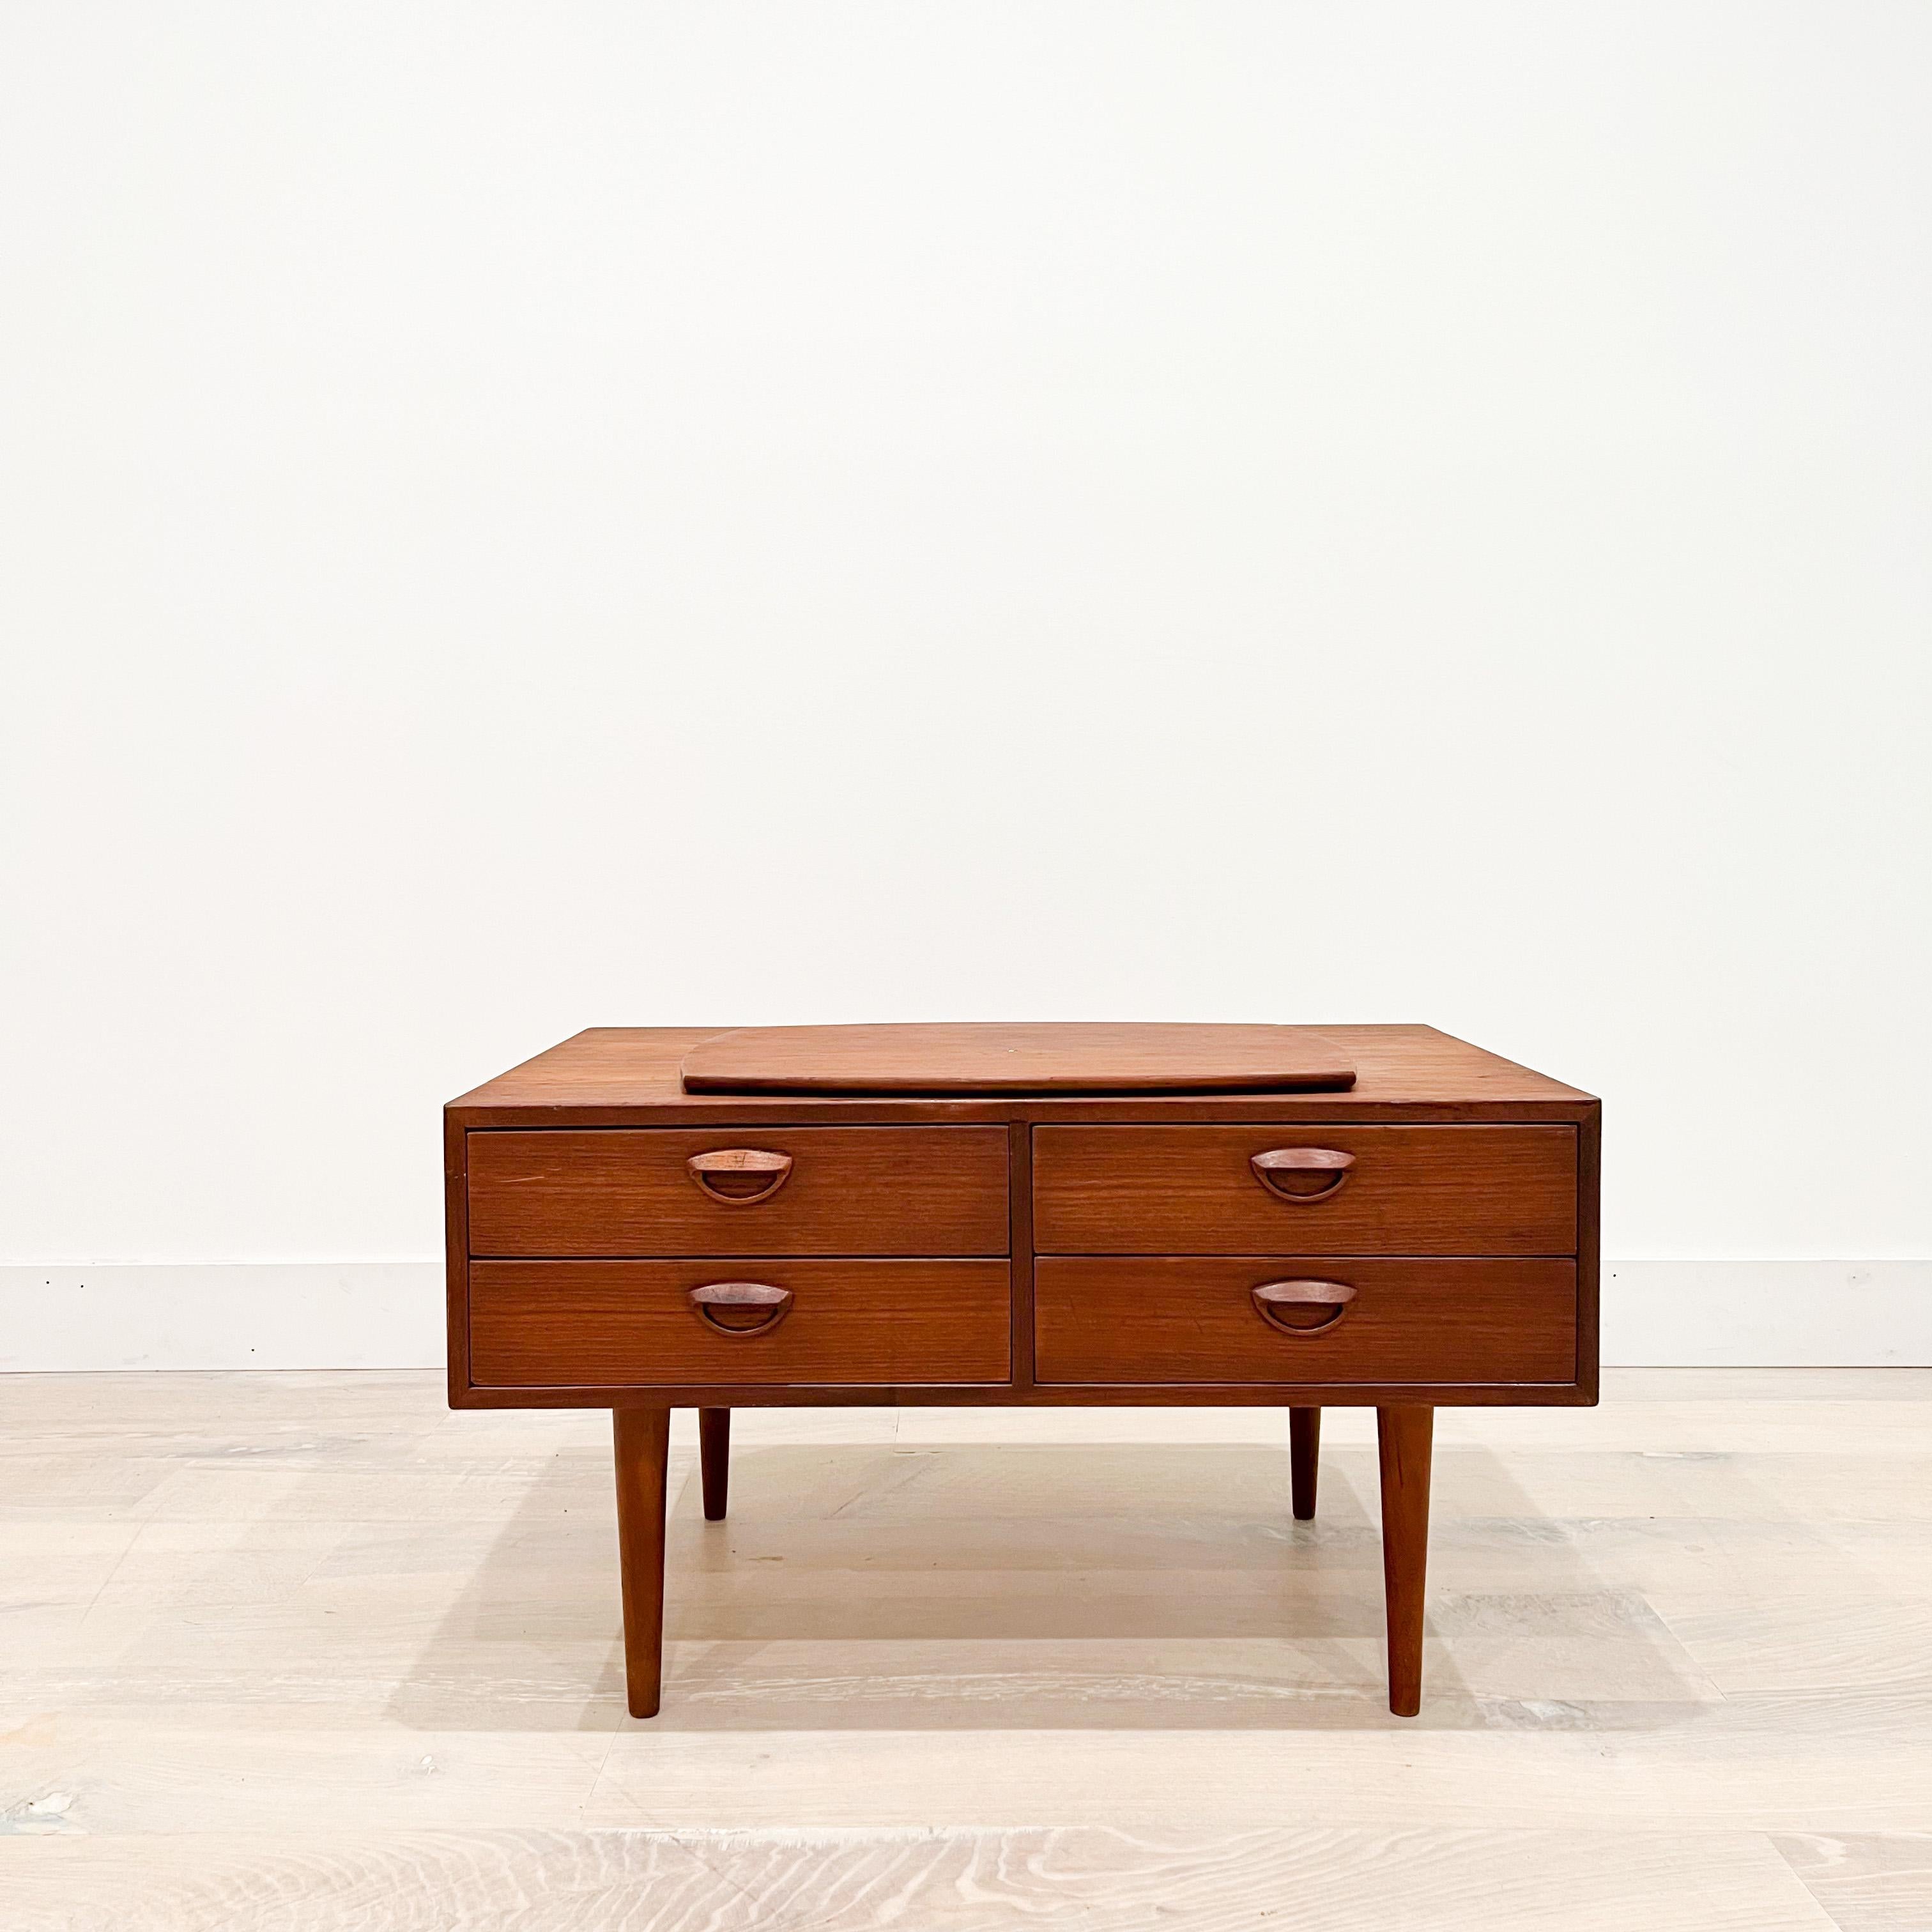 Small console or chest of drawers in teak designed by Kai Kristiansen, produced by Feldballes Møbelfabrik in the 1960s. The swivel top is perfect for a tv stand or other media devices. Features four drawers with carved handles. Very versatile design